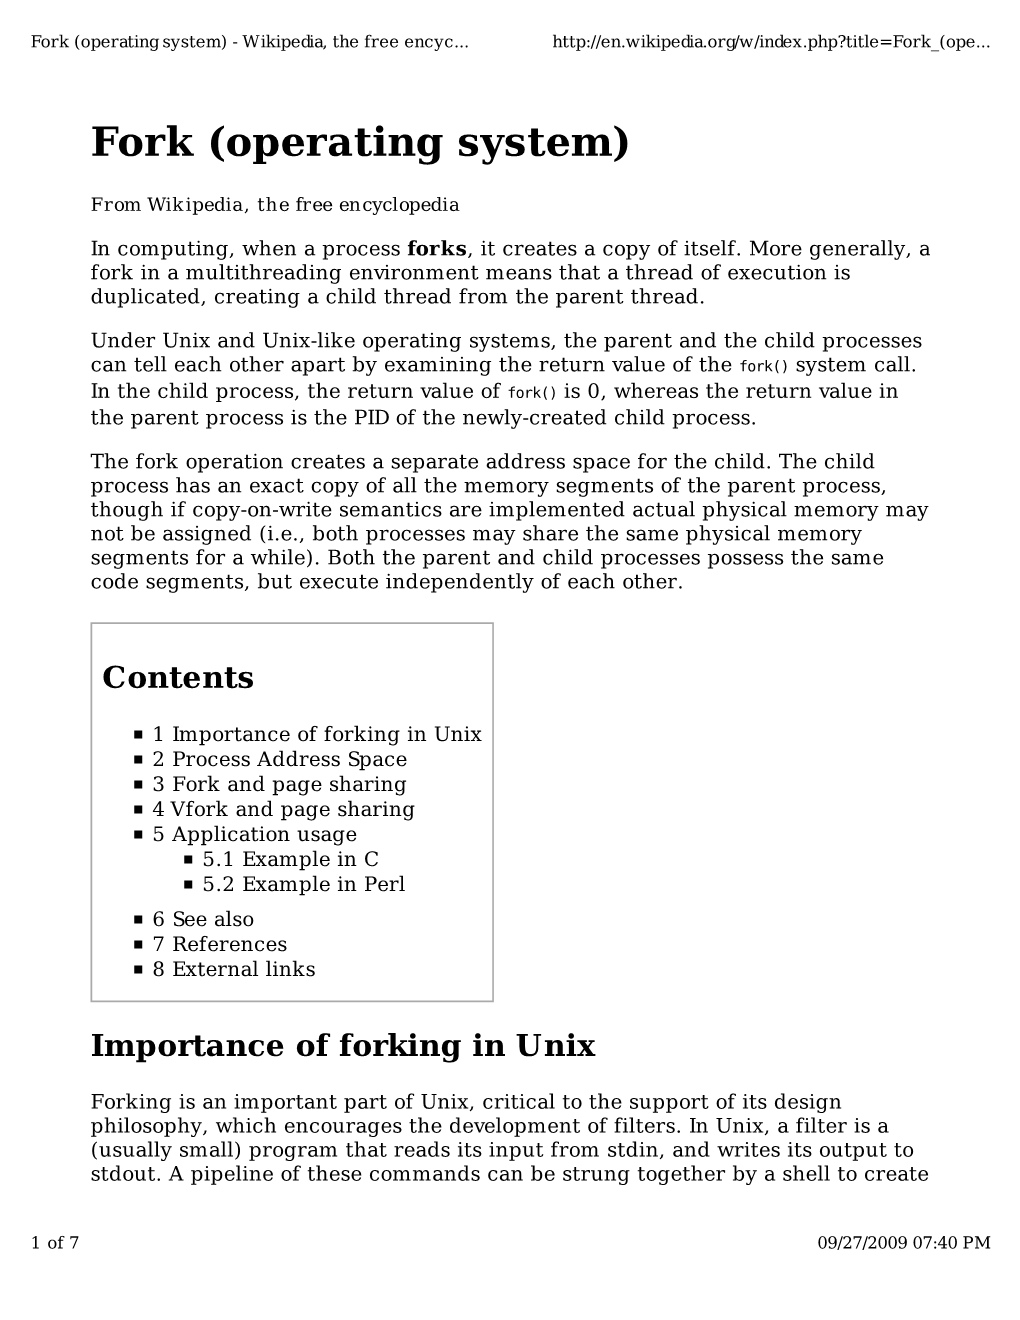 Fork (Operating System) - Wikipedia, the Free Encyc